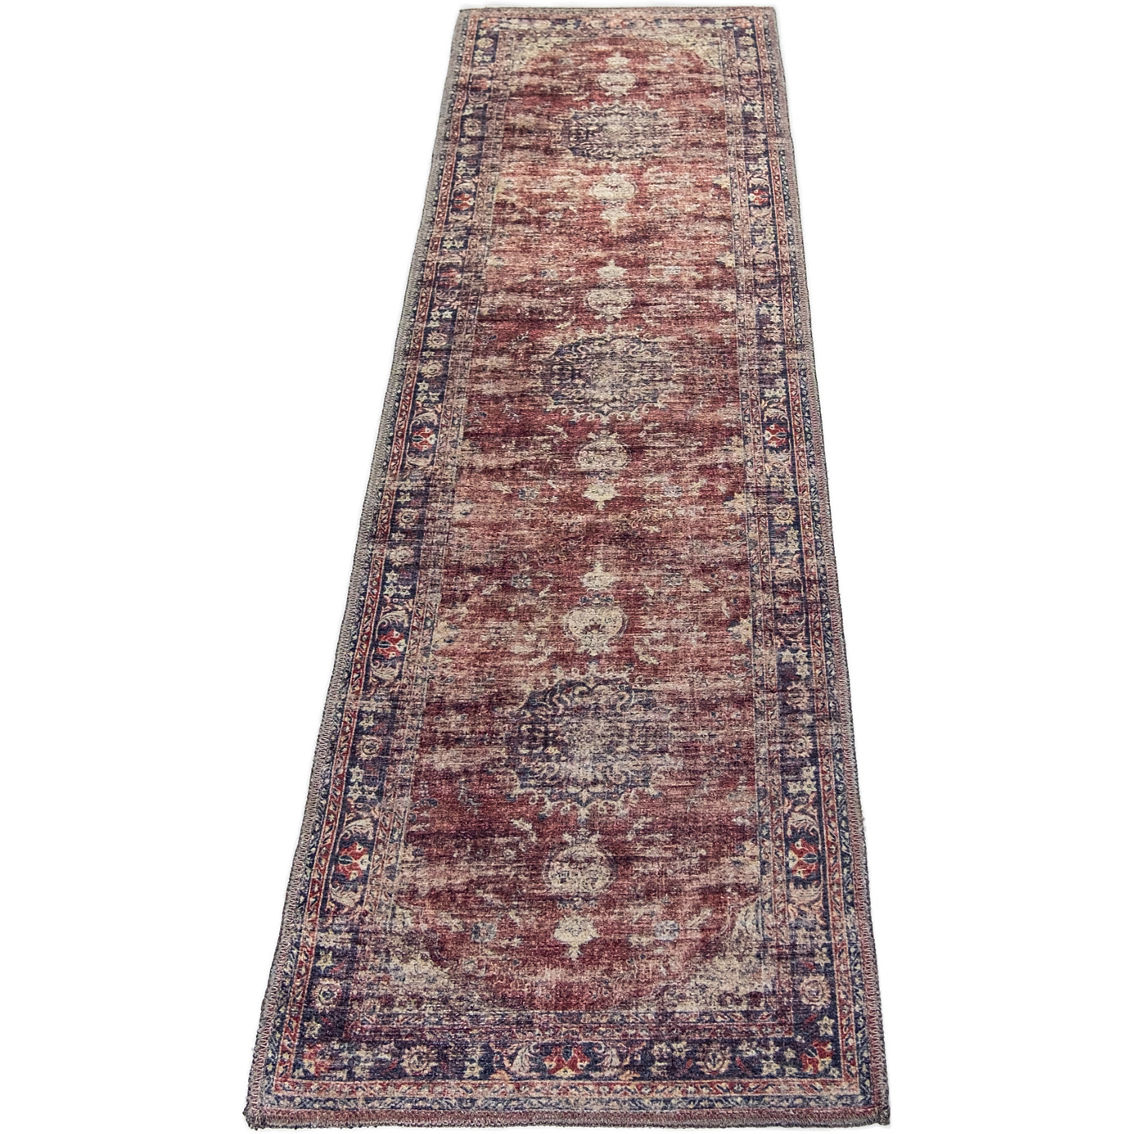 L'Baiet Angeline Red Distressed Washable 2 ft. x 6 ft. Runner Rug - Image 2 of 2